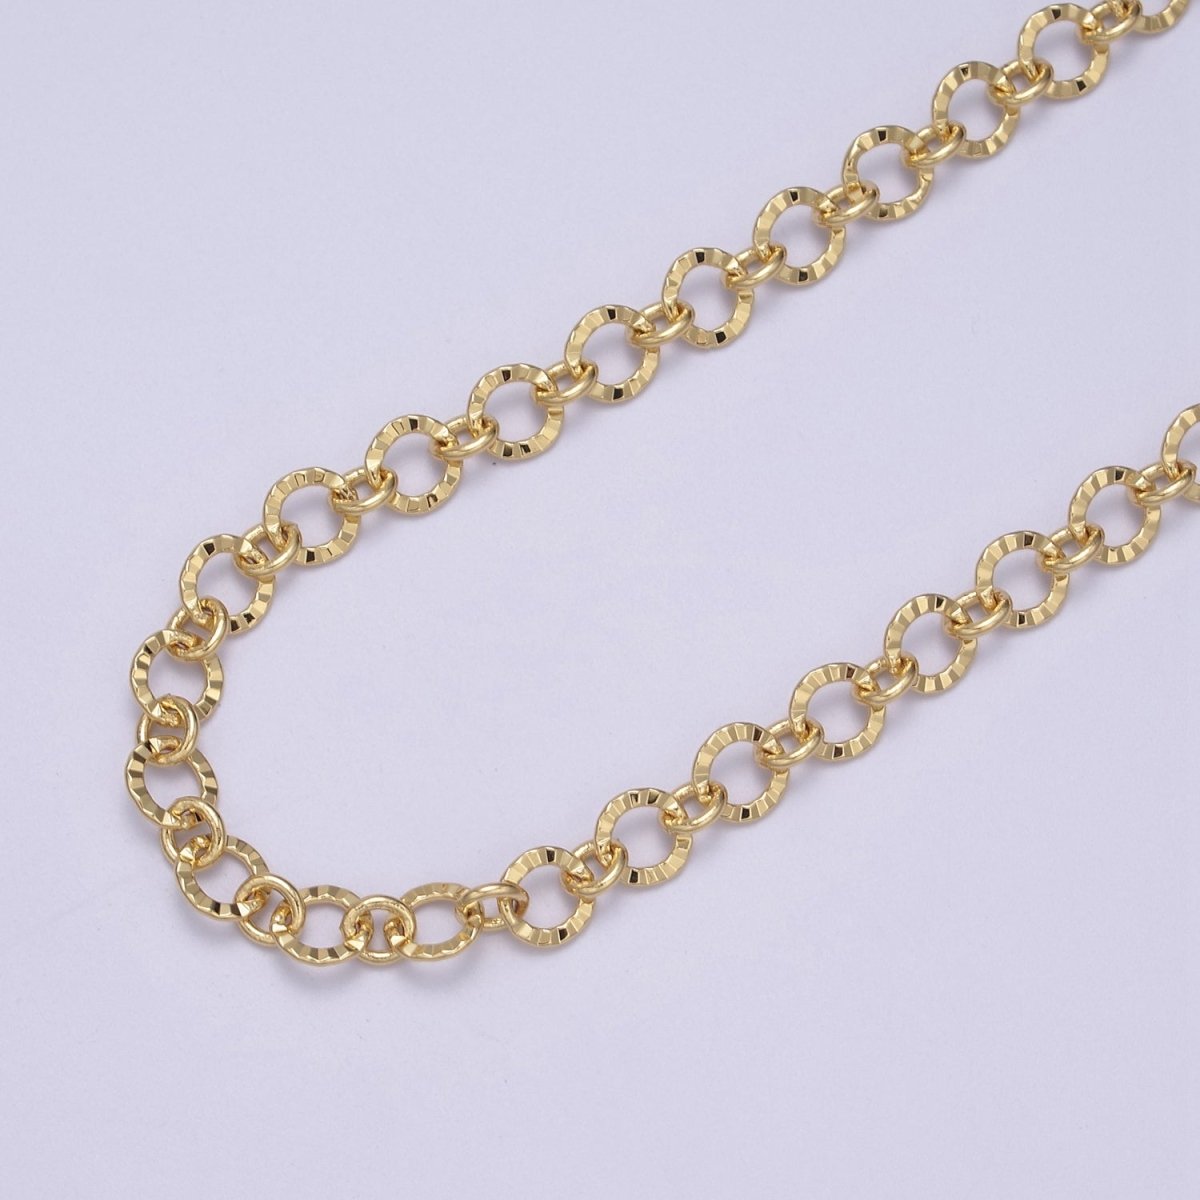 24K Gold Filled Textured Rolo Chain in Gold & Silver, 6mm Rolo Chain For Jewelry Making | ROLL-642, ROLL-643 Clearance Pricing - DLUXCA